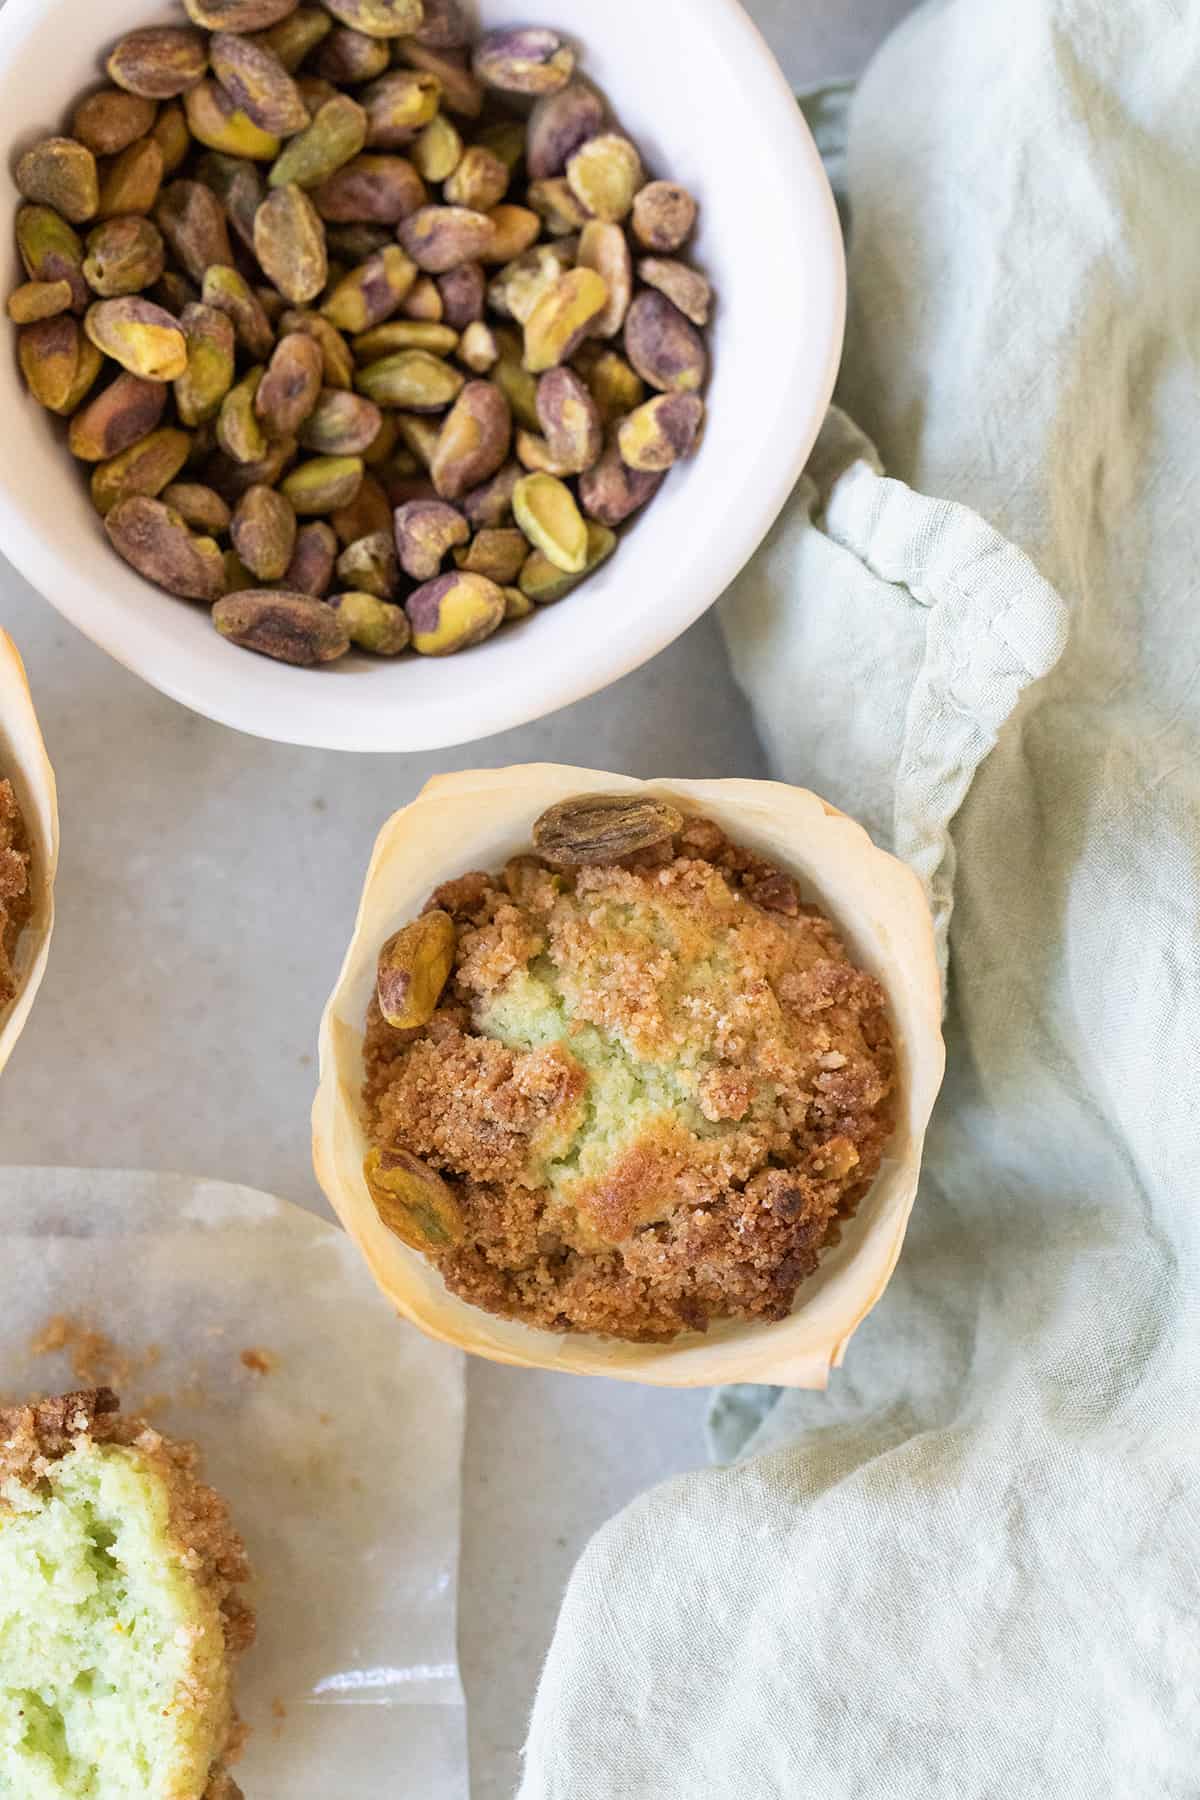 Green pistachio muffin with a crumble top.